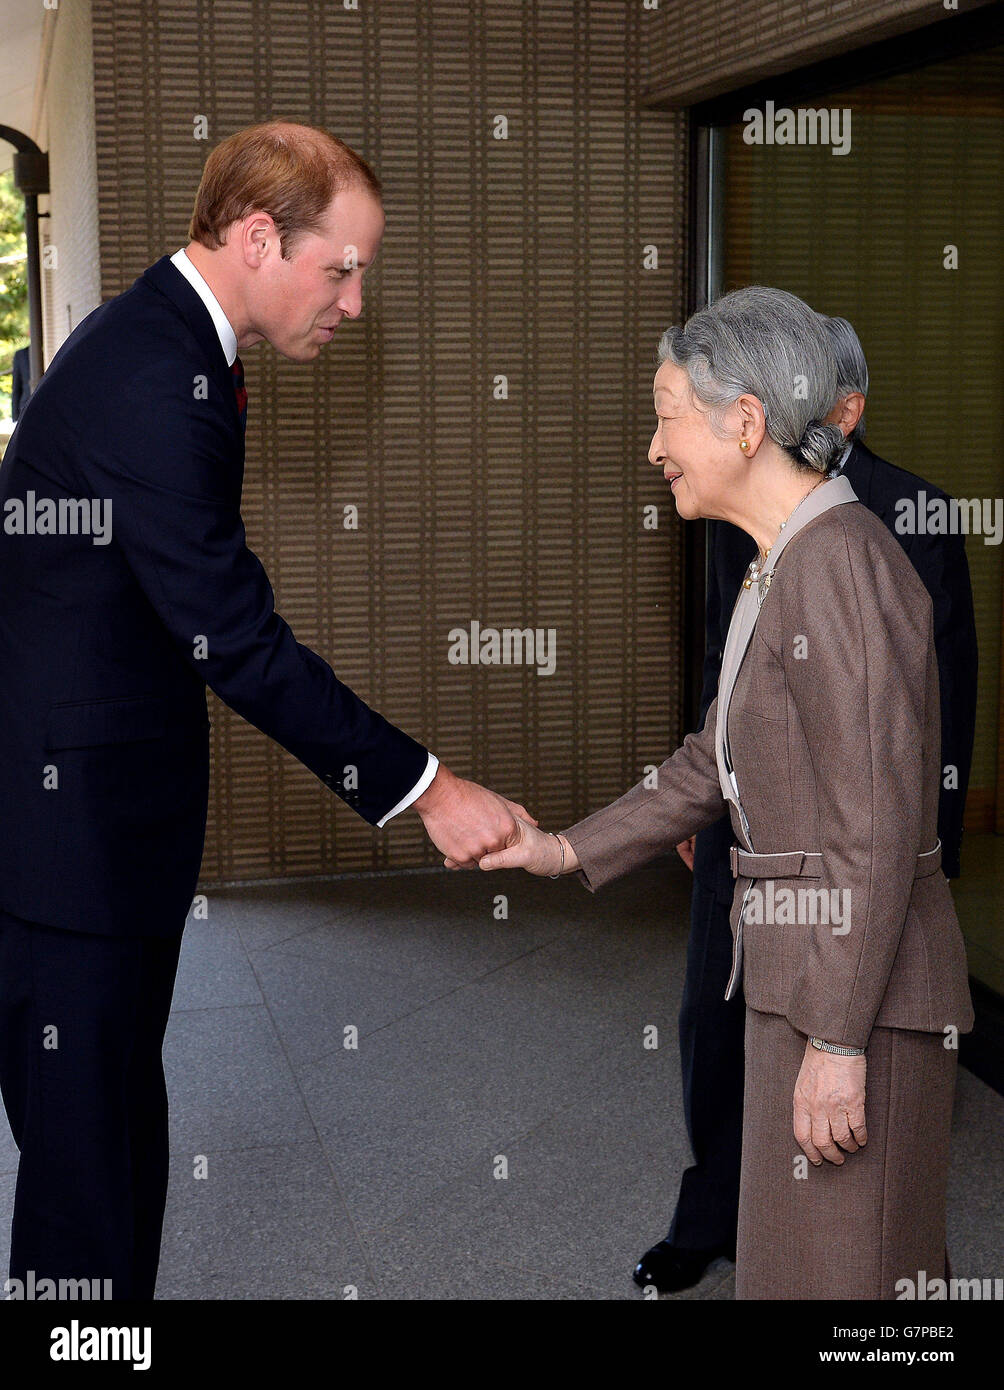 The Duke of Cambridge bows as he shakes hands with Empress Michiko, after he arrived for lunch with the Emperor and his wife at the couple's residence within the Royal Palace grounds in central Tokyo, during the second day of his trip to Japan. Stock Photo